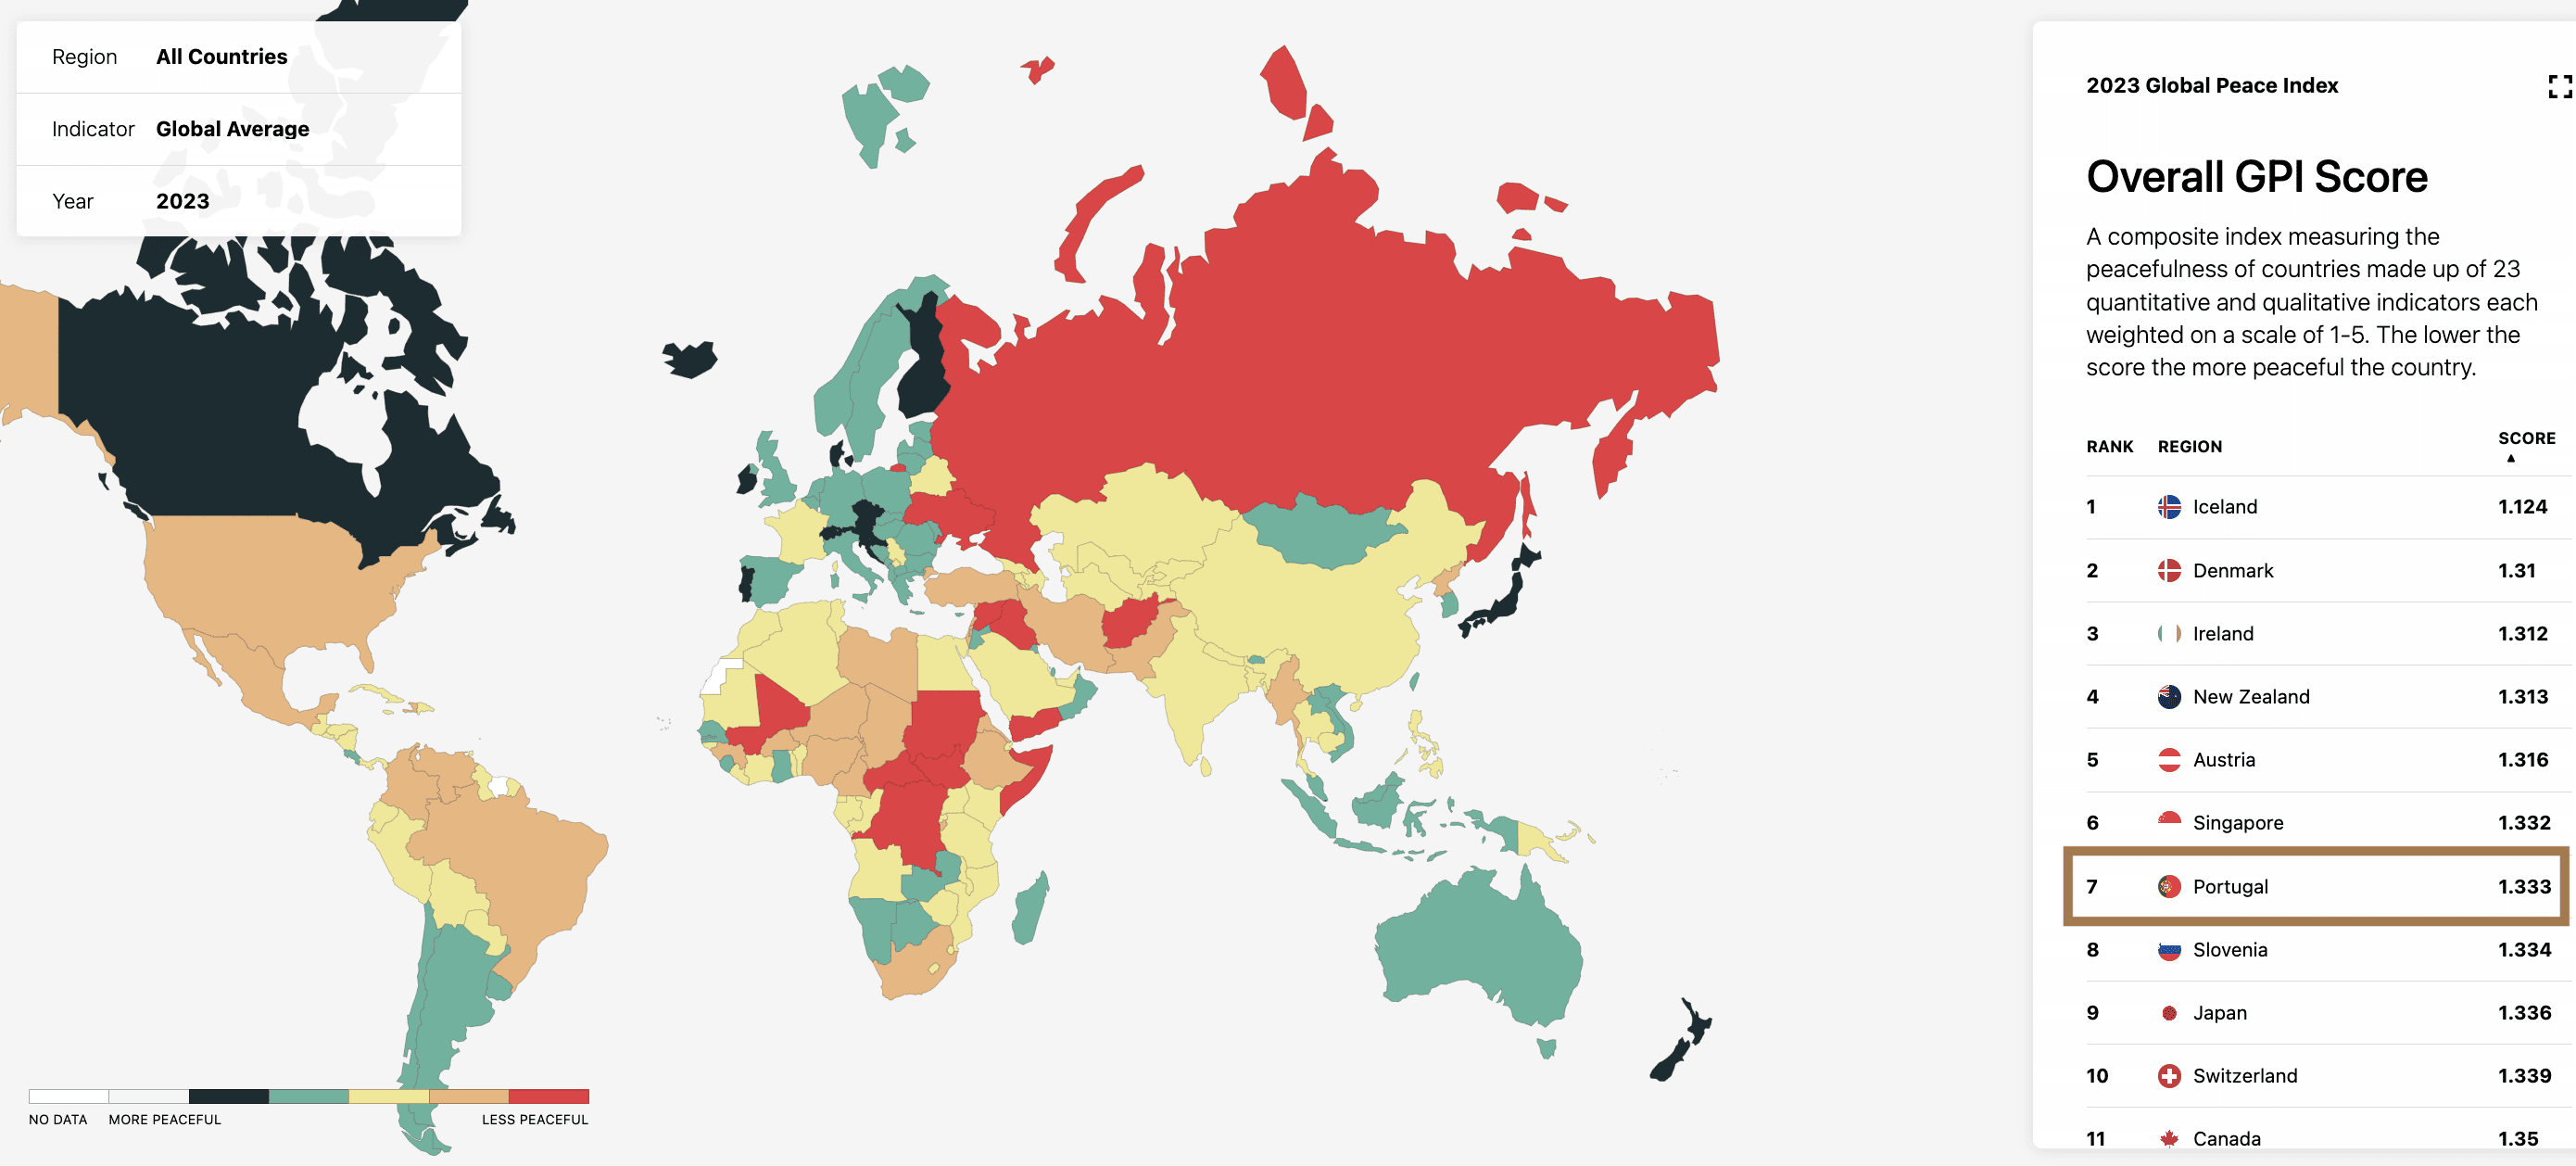 portugal global peace index map